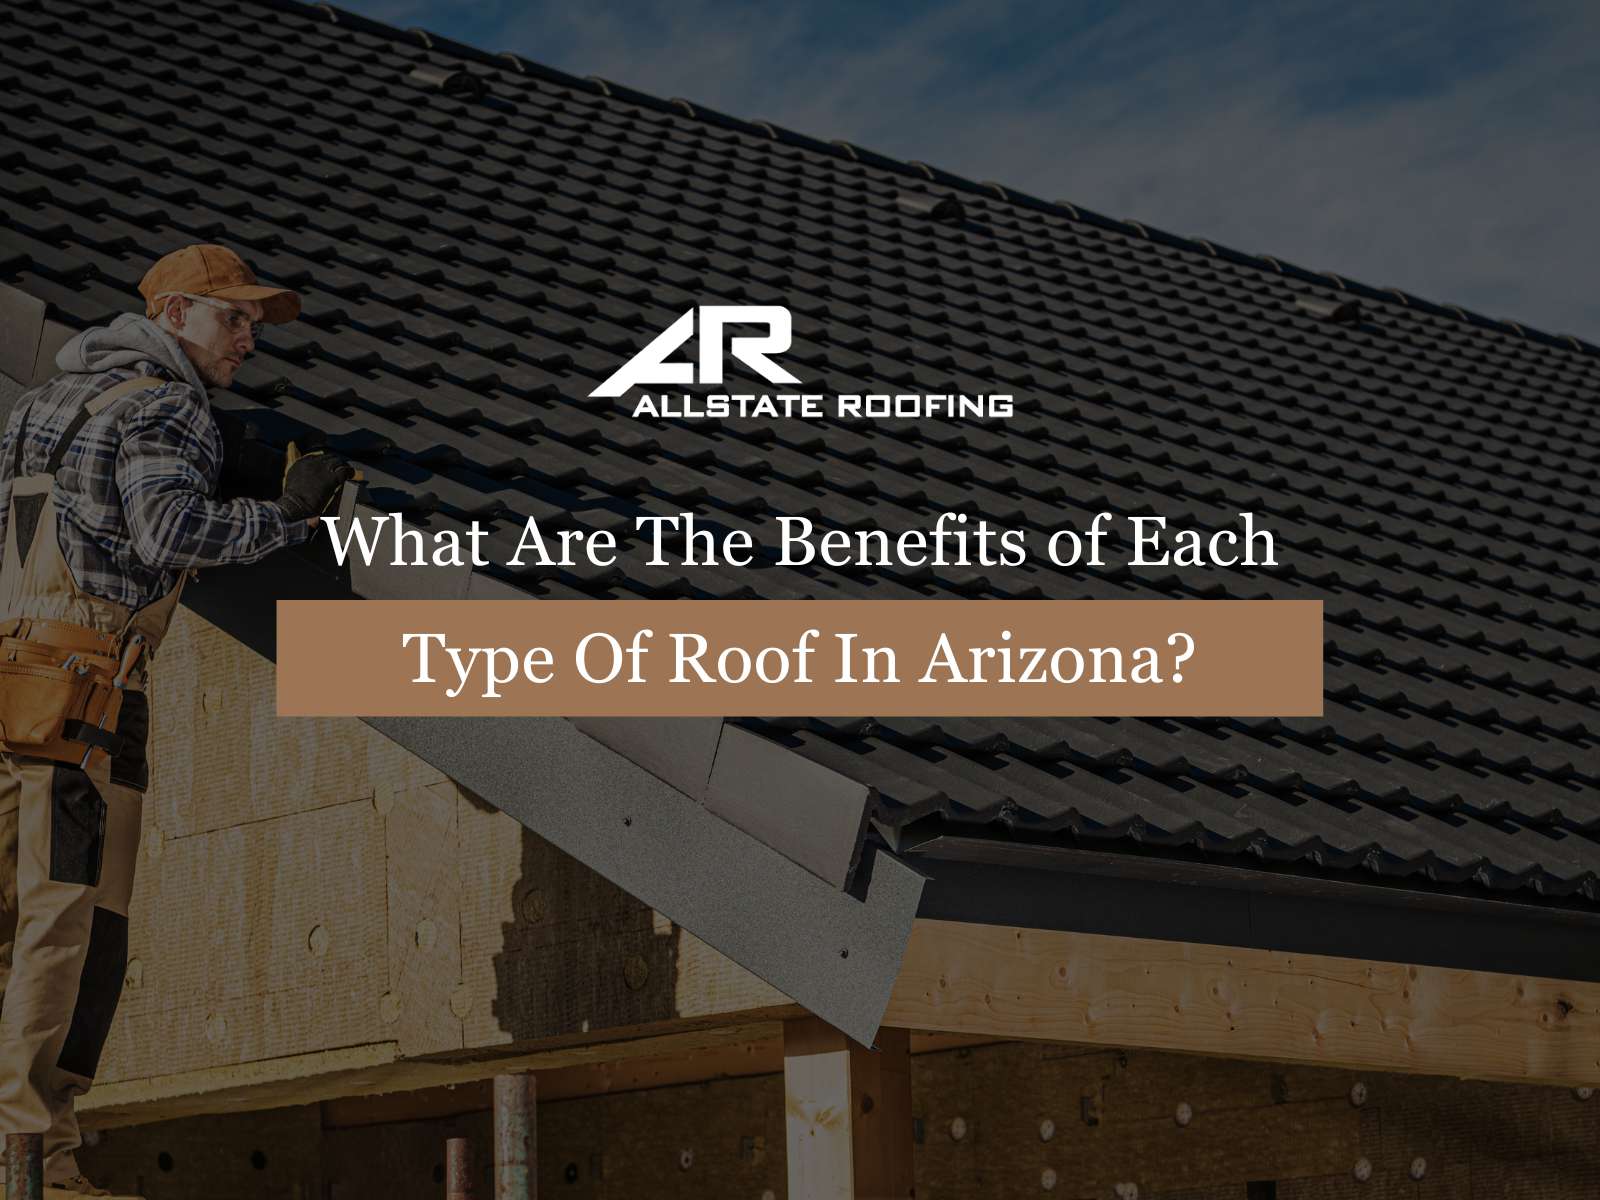 What are The Benefits of Each Type of Roof in Arizona?